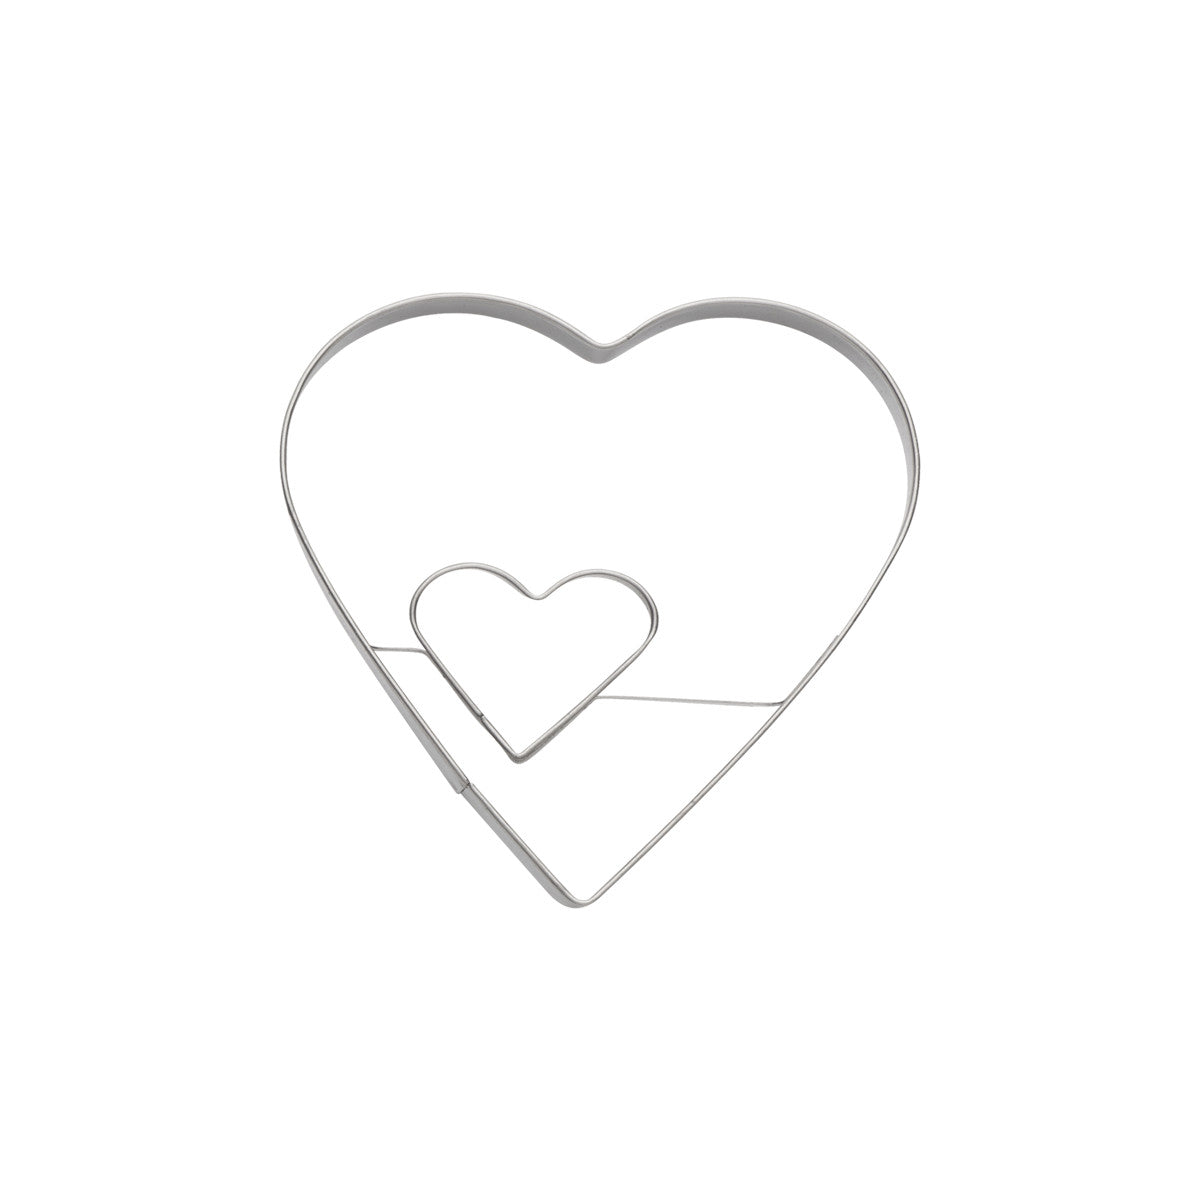 DOUBLE HEART 8 cm COOKIE CUTTER